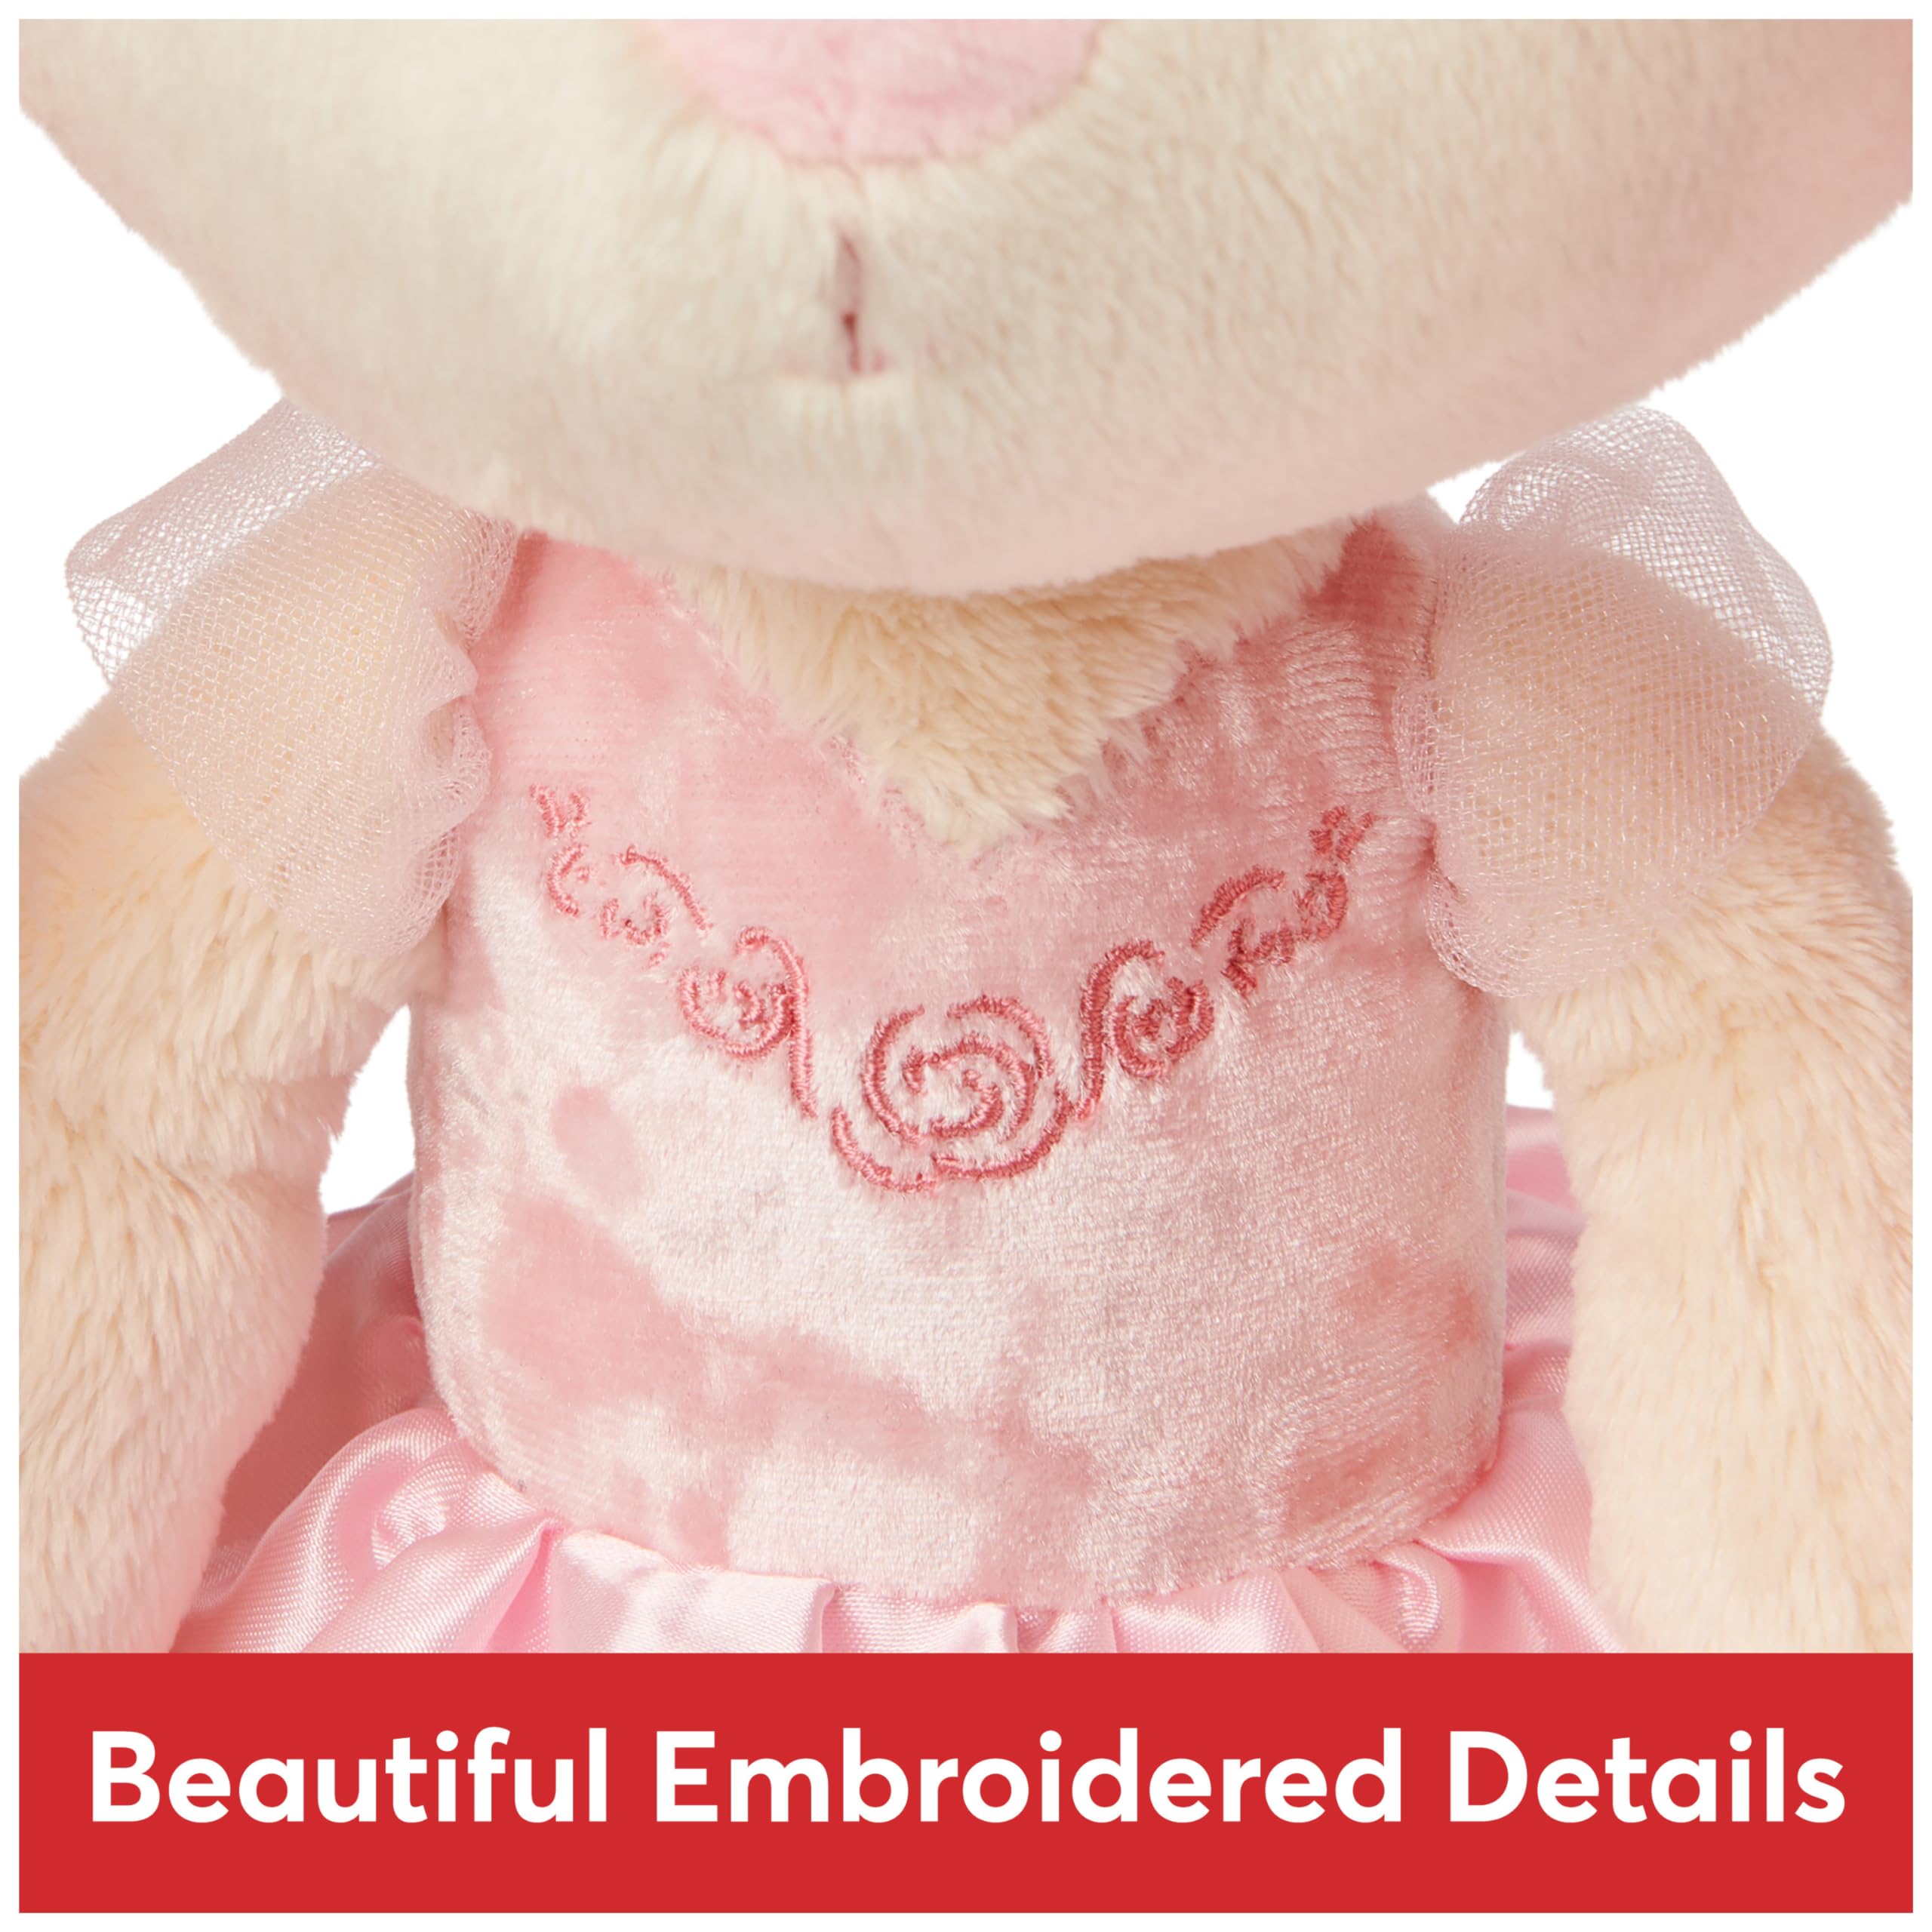 GUND Take-Along Friends Plush, Curtsy Ballerina Bunny, Stuffed Animal for Ages 1 and Up, Pink, 15